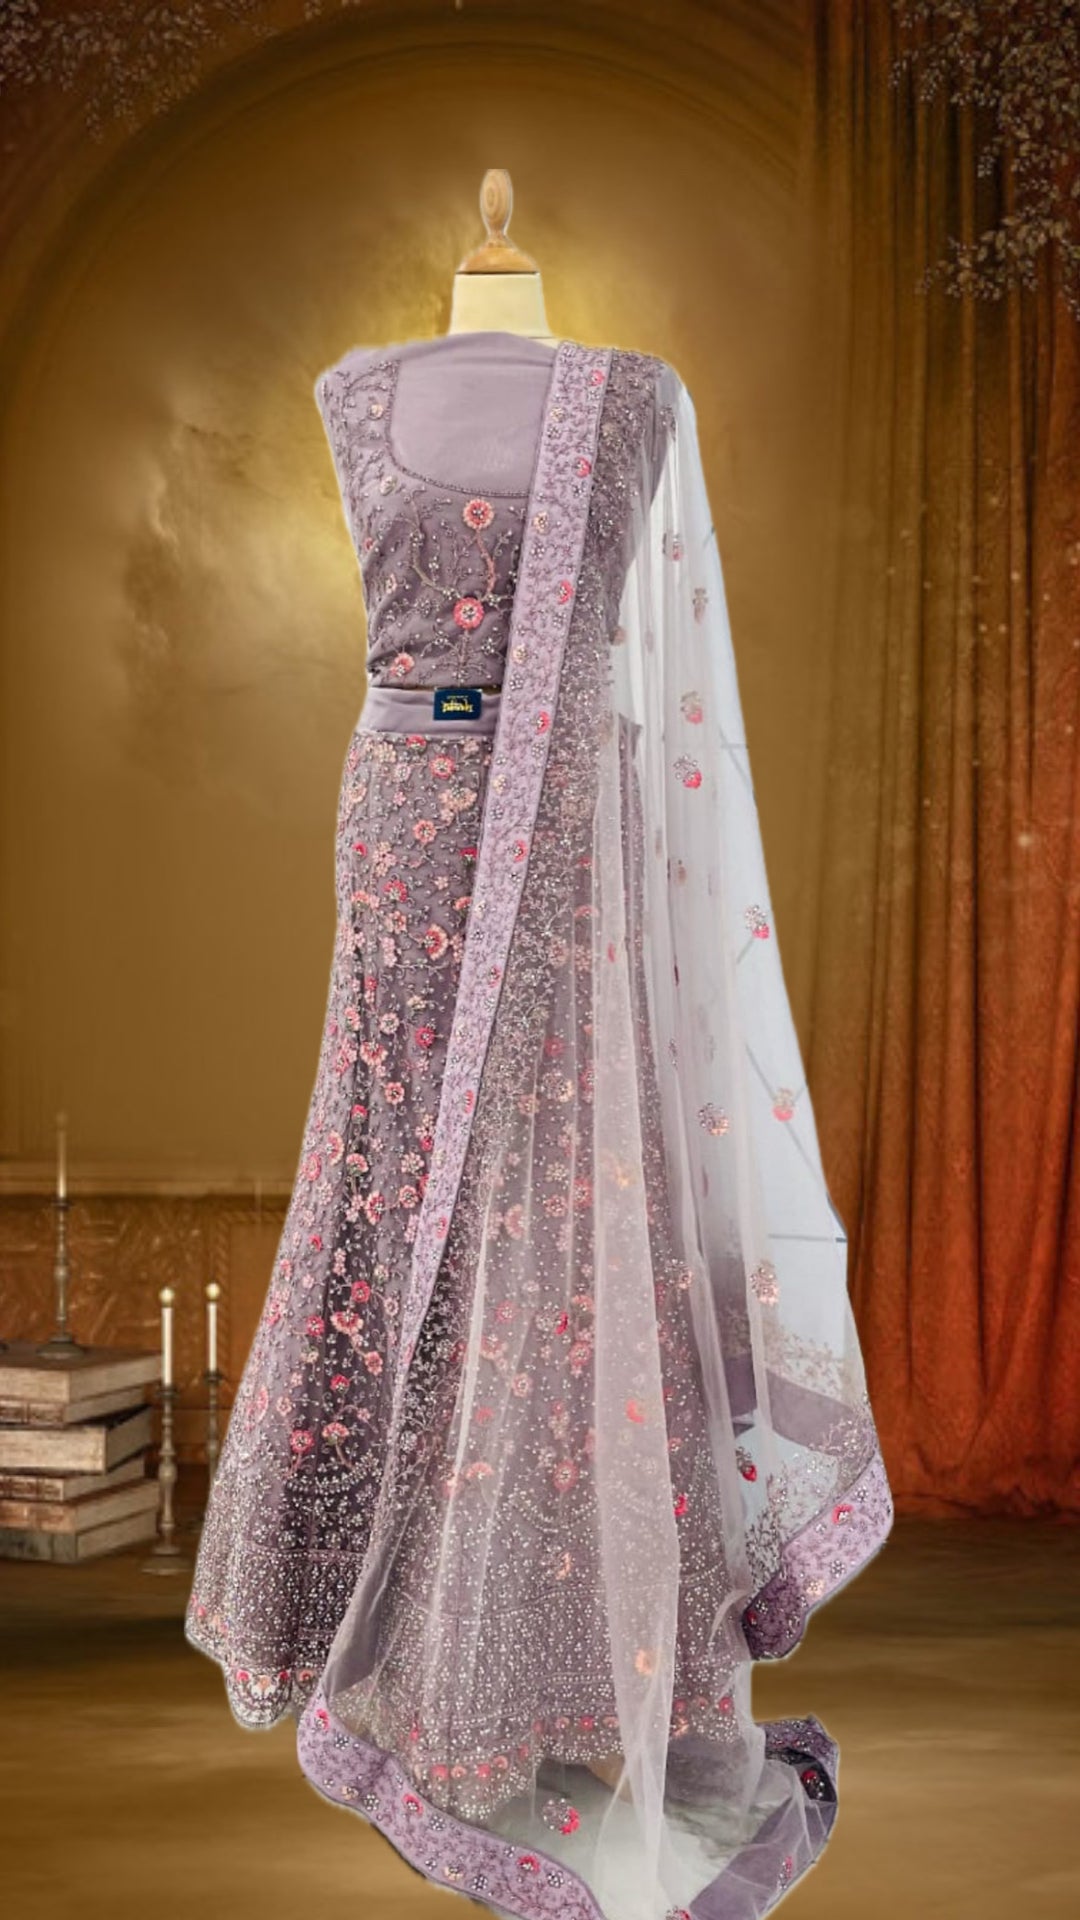 Shagun Lilac with pink and Silver Net Lehenga (Unstitched)